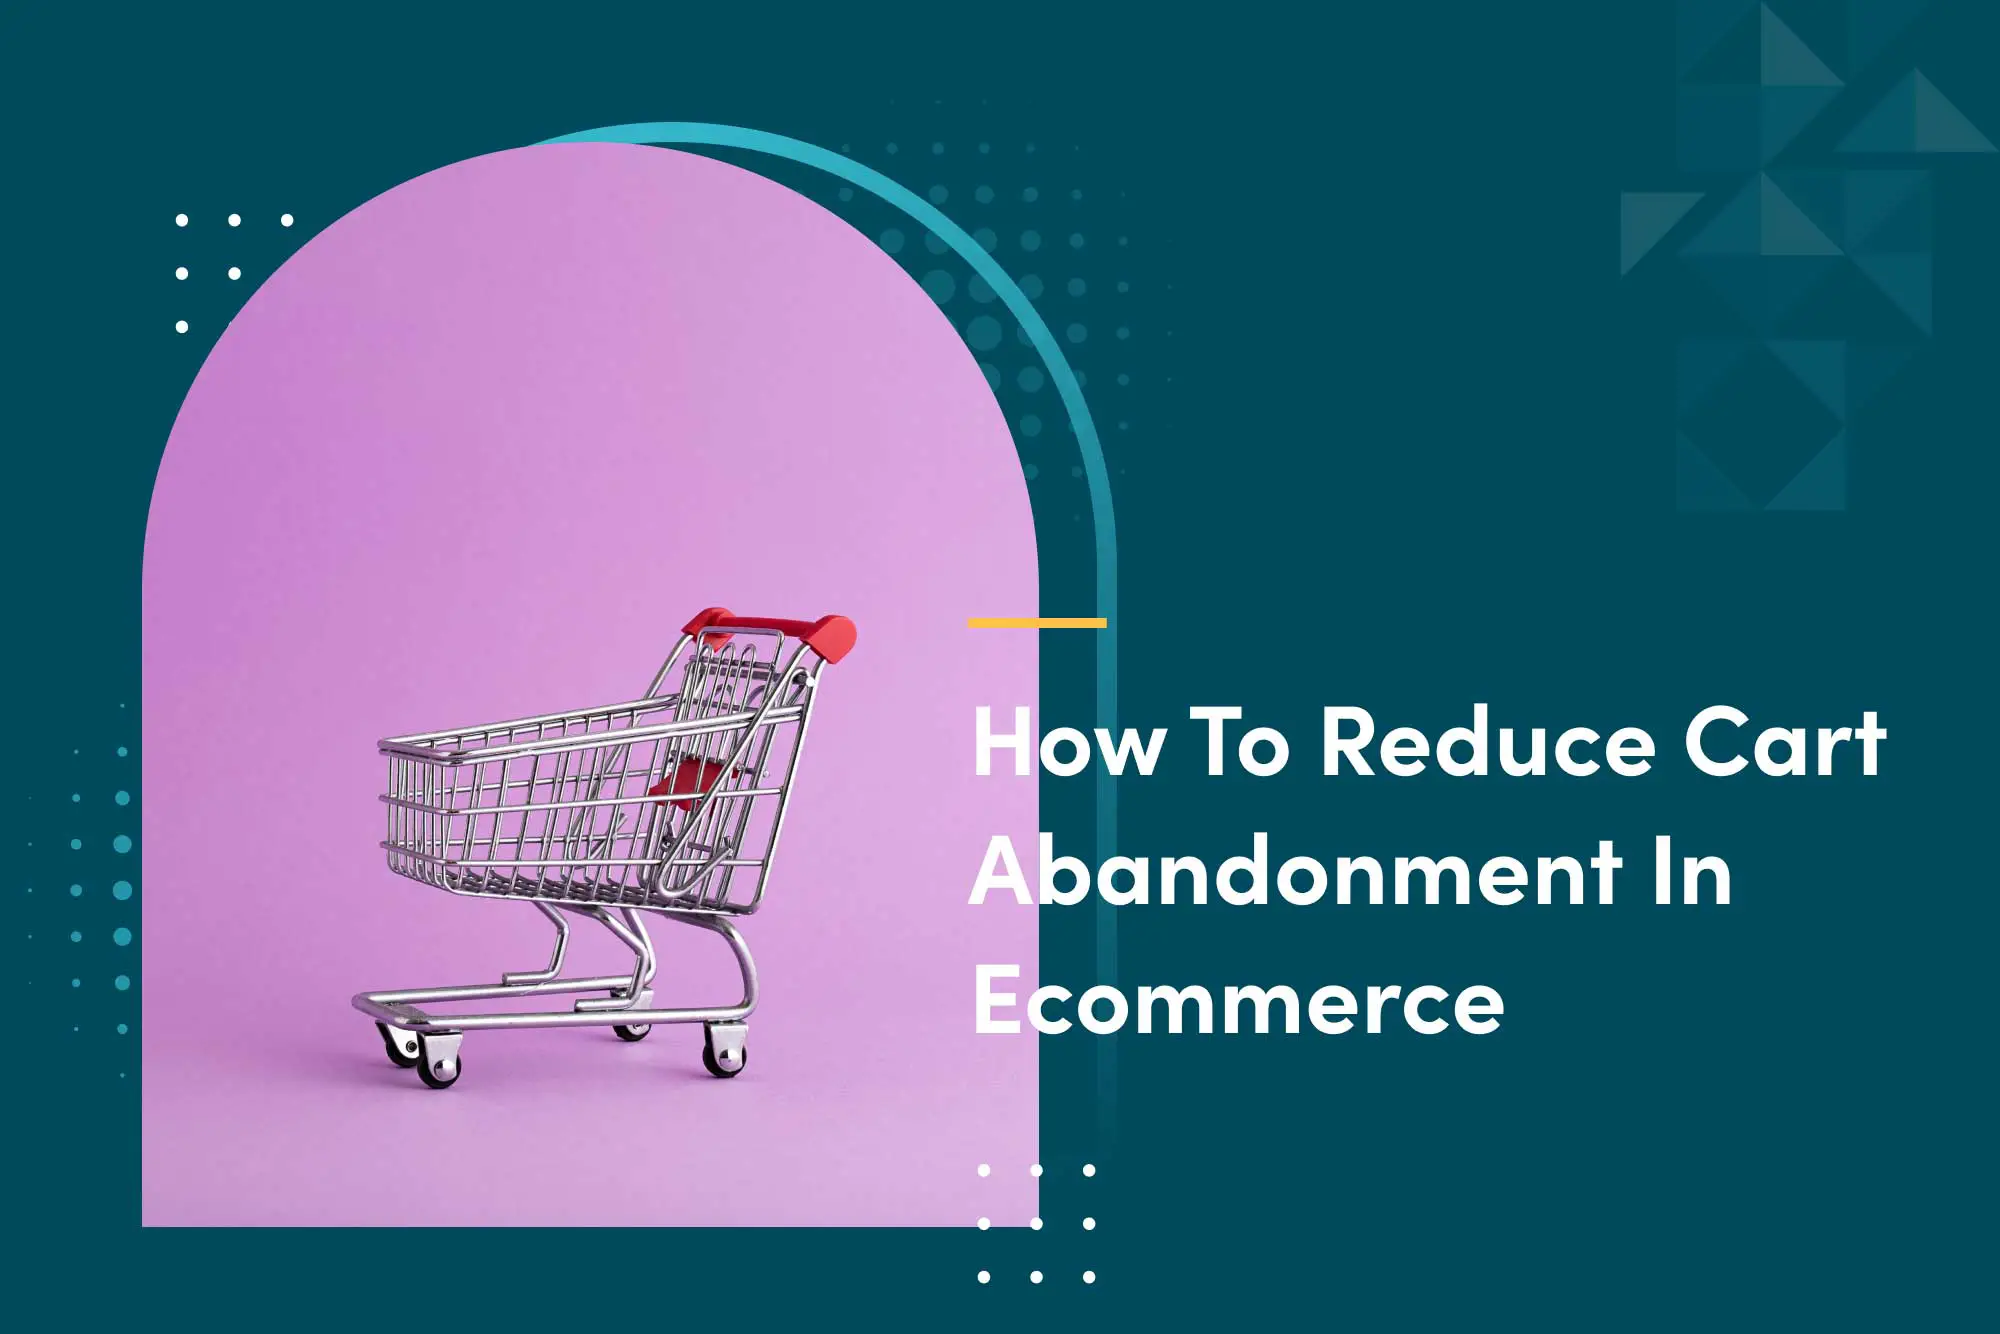 How-to-reduce-cart-abandonment-in-ecommerce